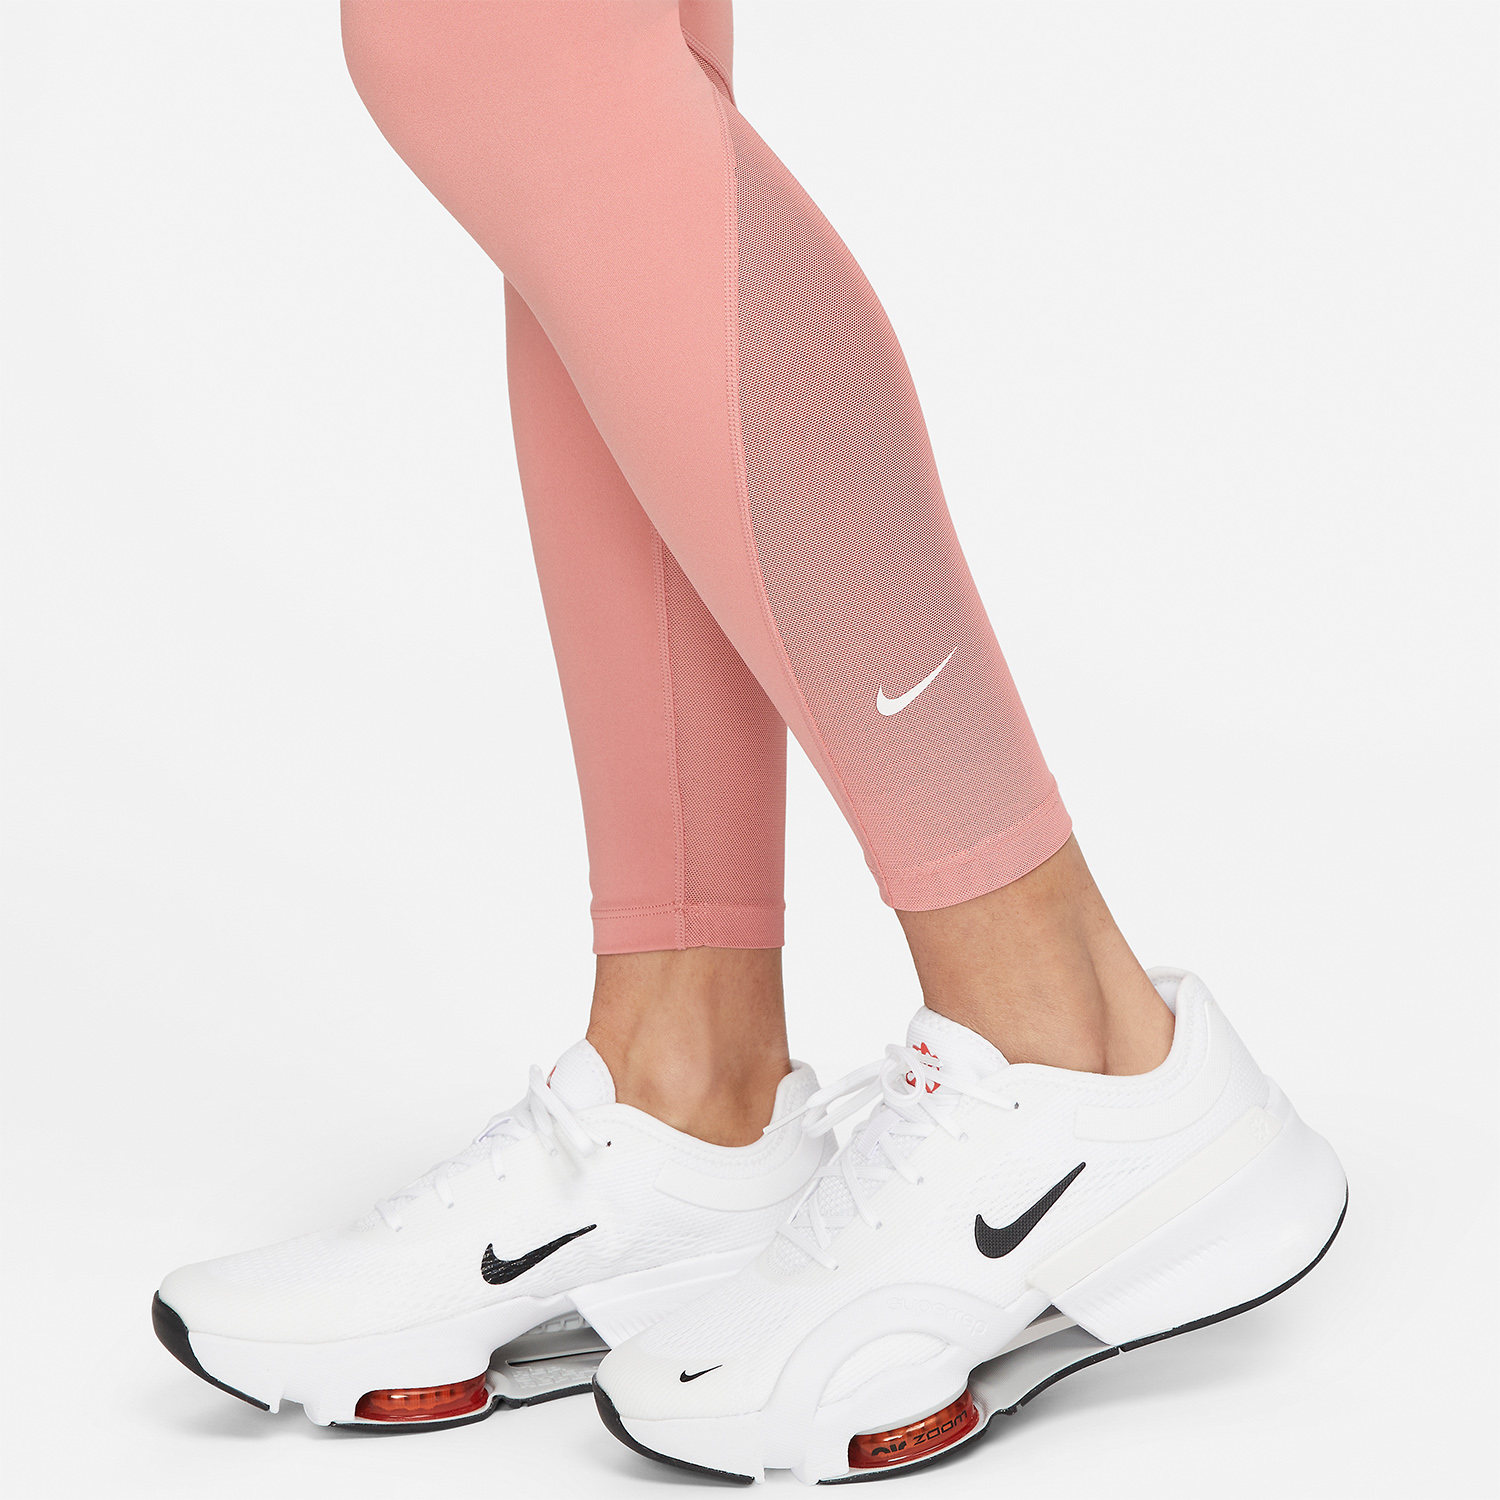 Nike One Mid Rise 7/8 Tights - Red Stardust/White